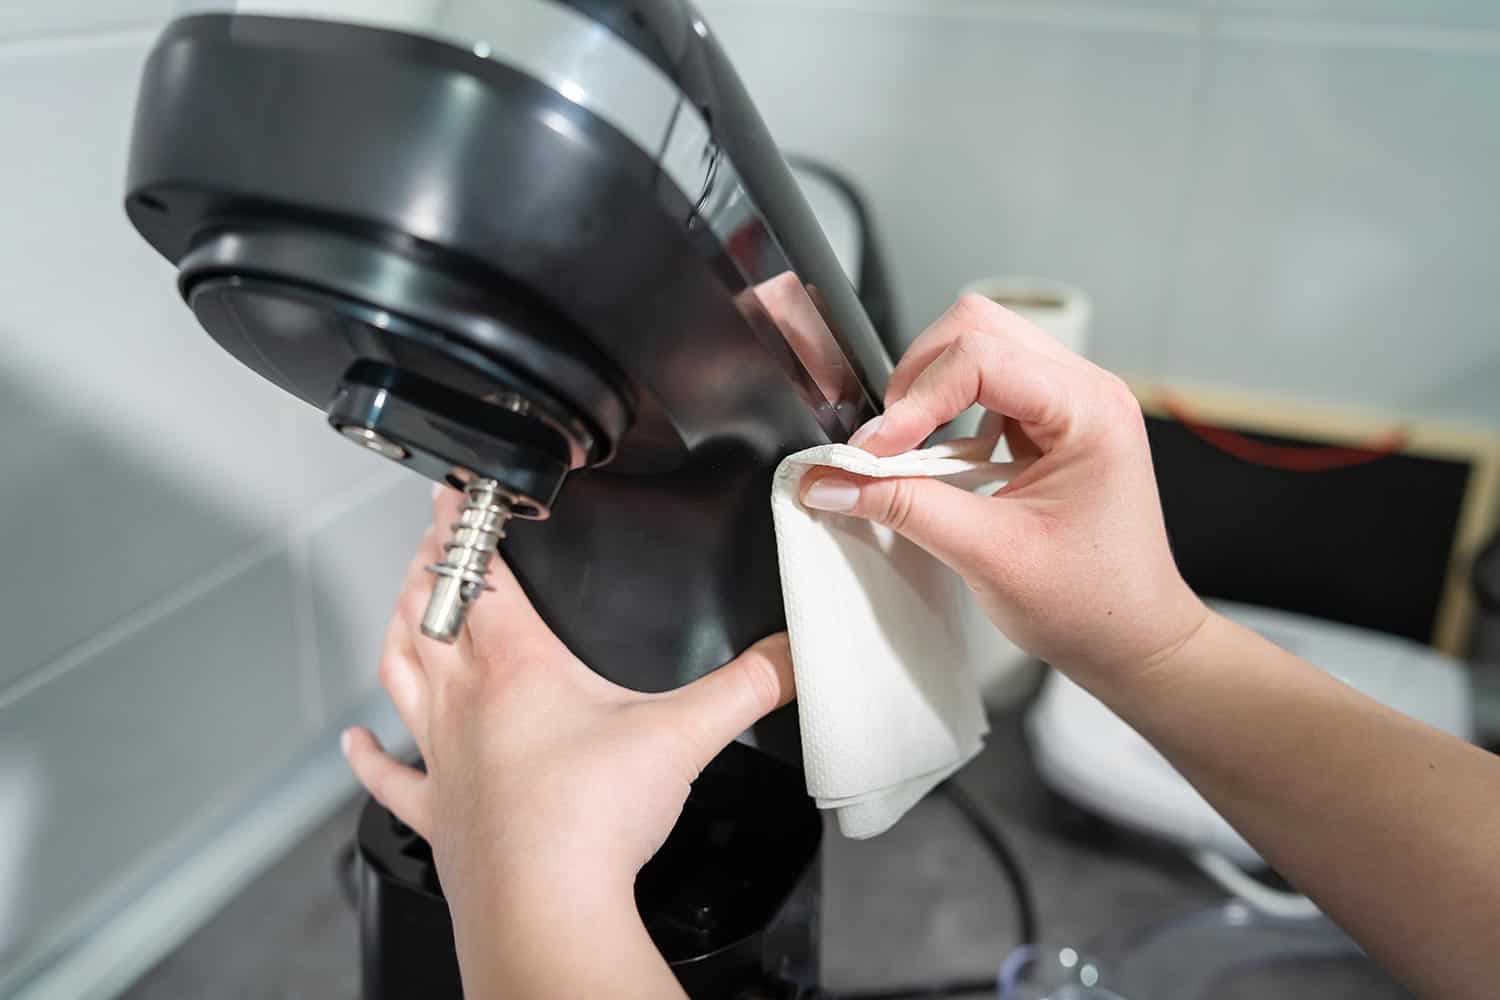 Woman wiping cleaning stand mixer in the kitchen